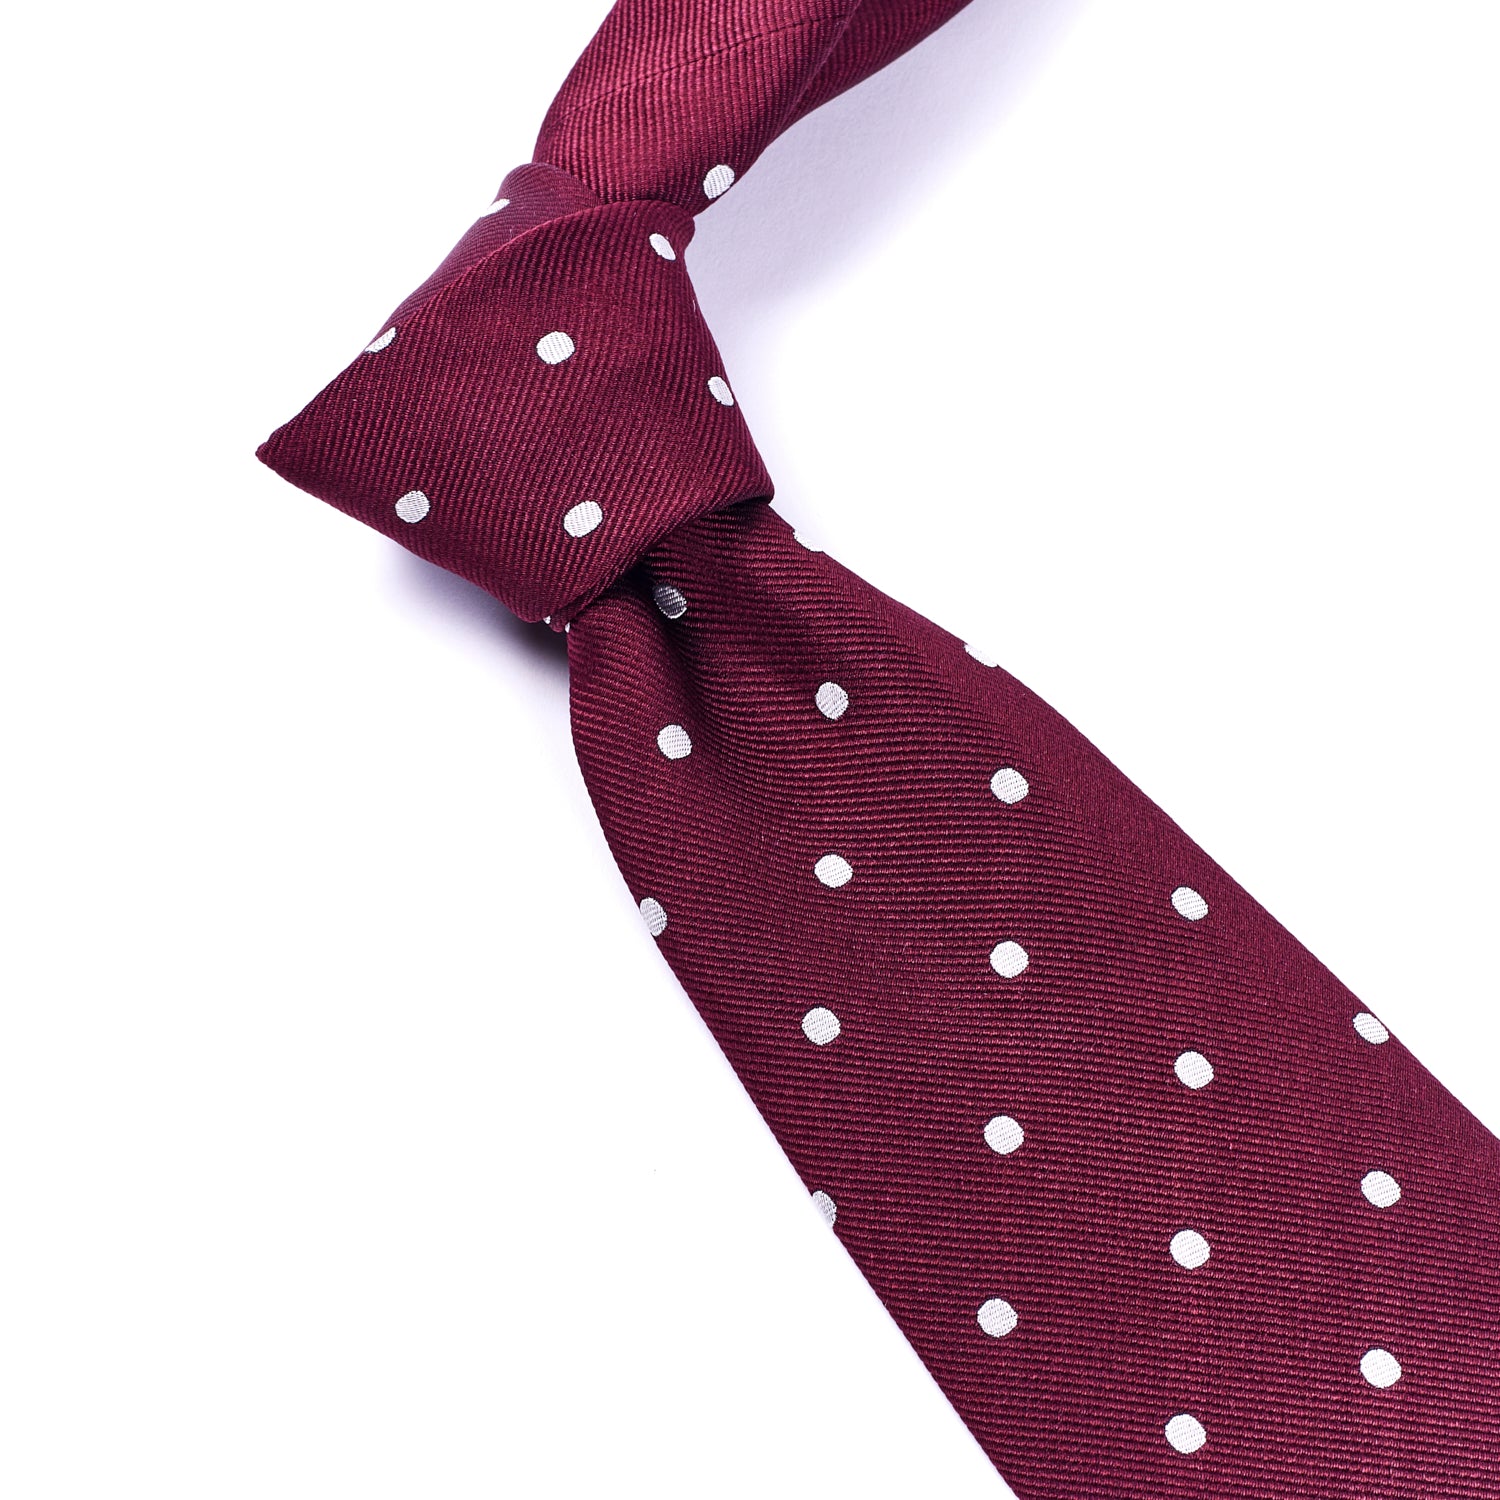 A Sovereign Grade Woven Oxblood Wide Dot Tie on a white background from KirbyAllison.com.